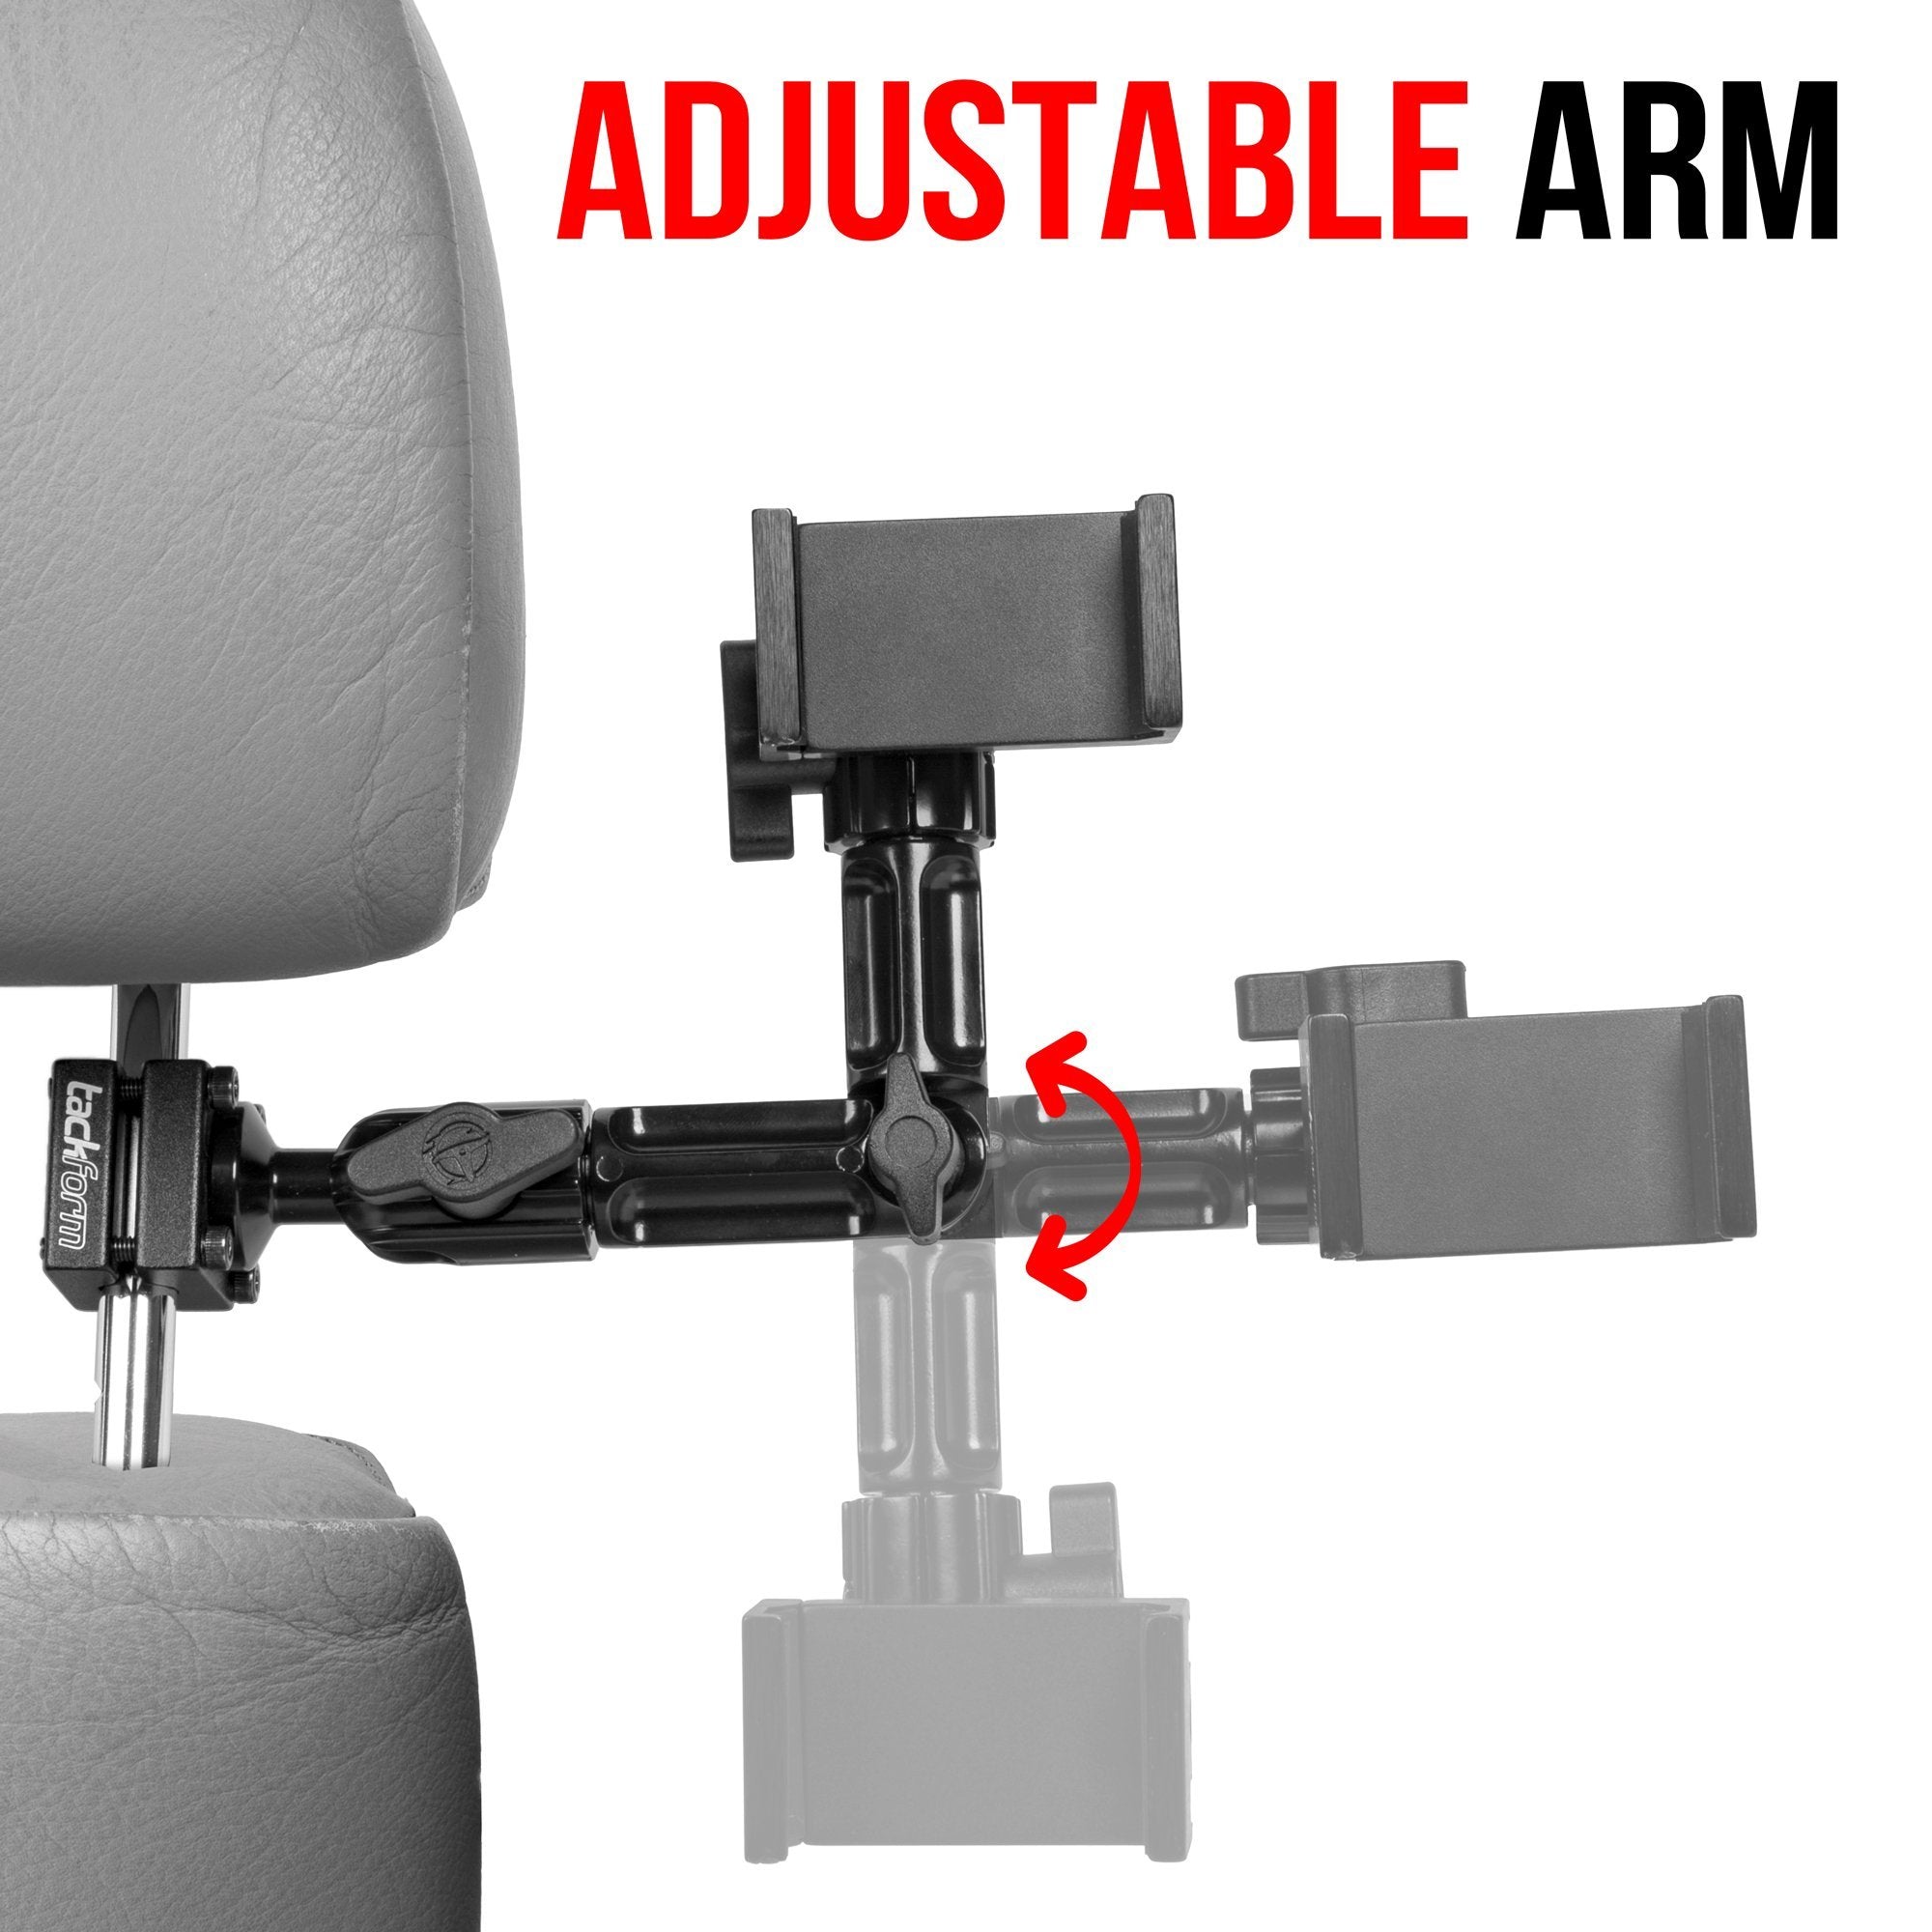 Headrest Mount for Phone | 7" Modular Arm | Enduro Series | All Metal Construction | Spring Loaded Cradle